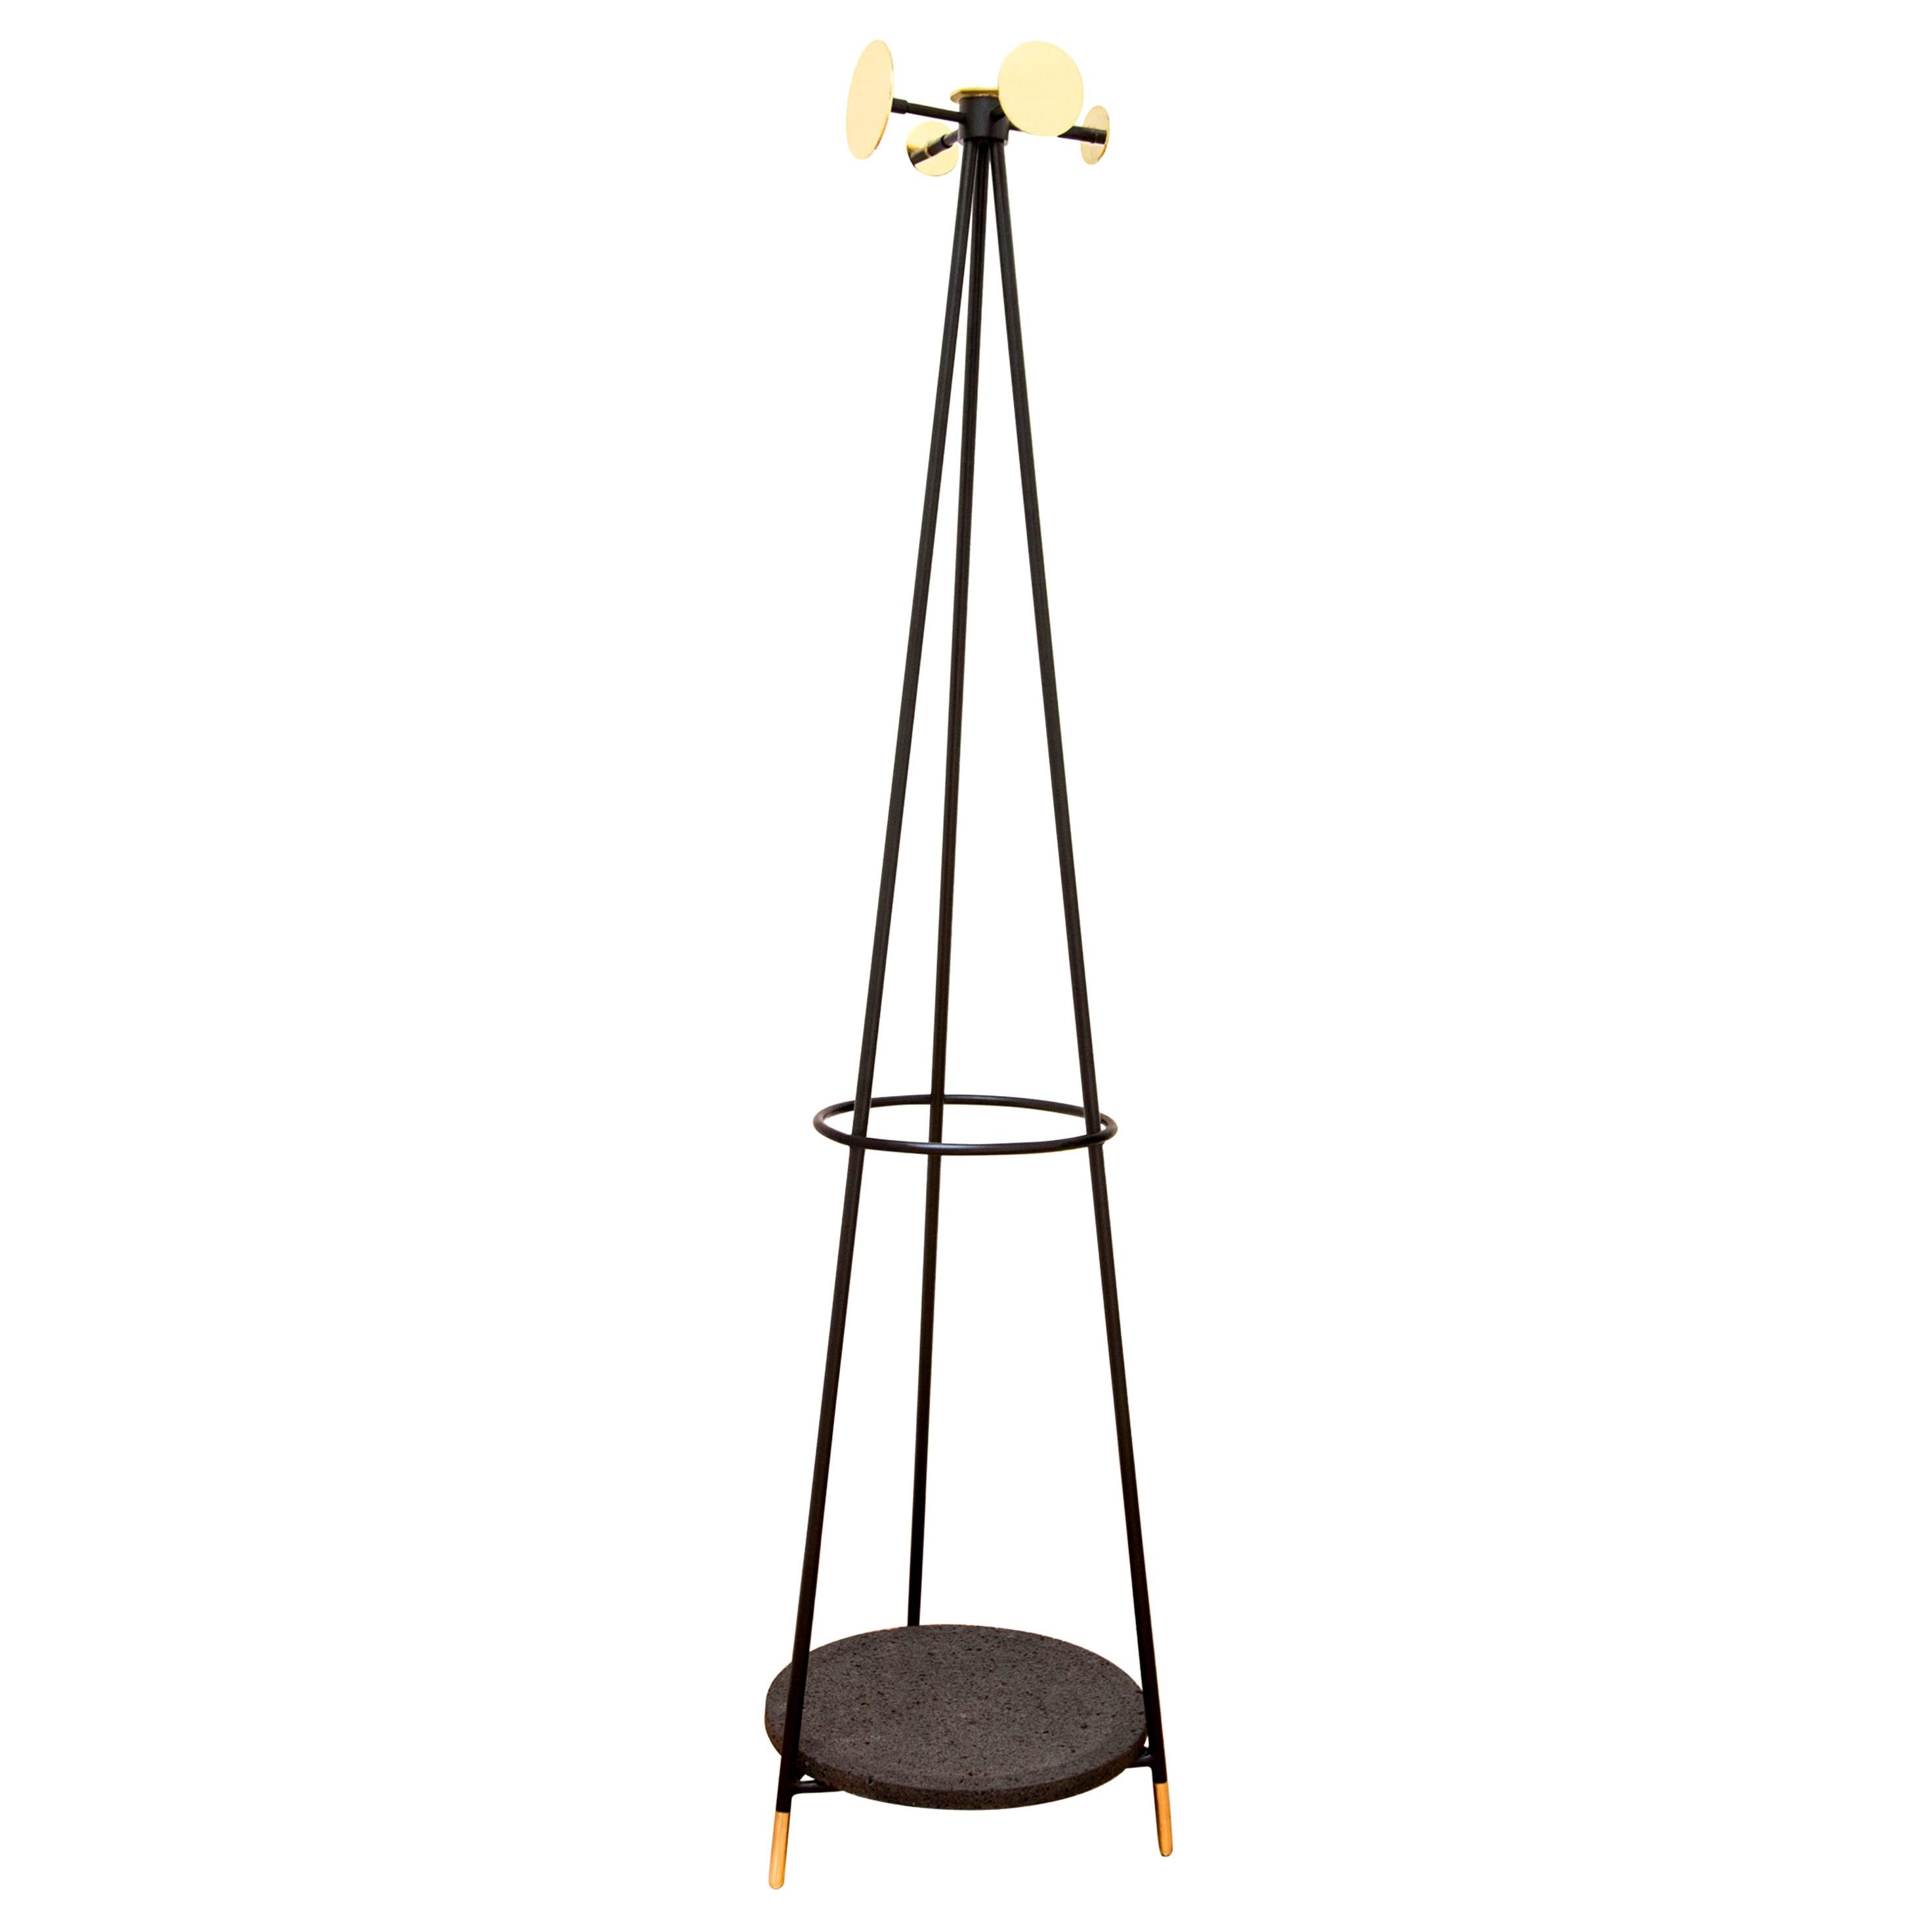 Hand-Carved Coat and Umbrella Stand, Brass and Metal, Contemporary Mexican Design For Sale